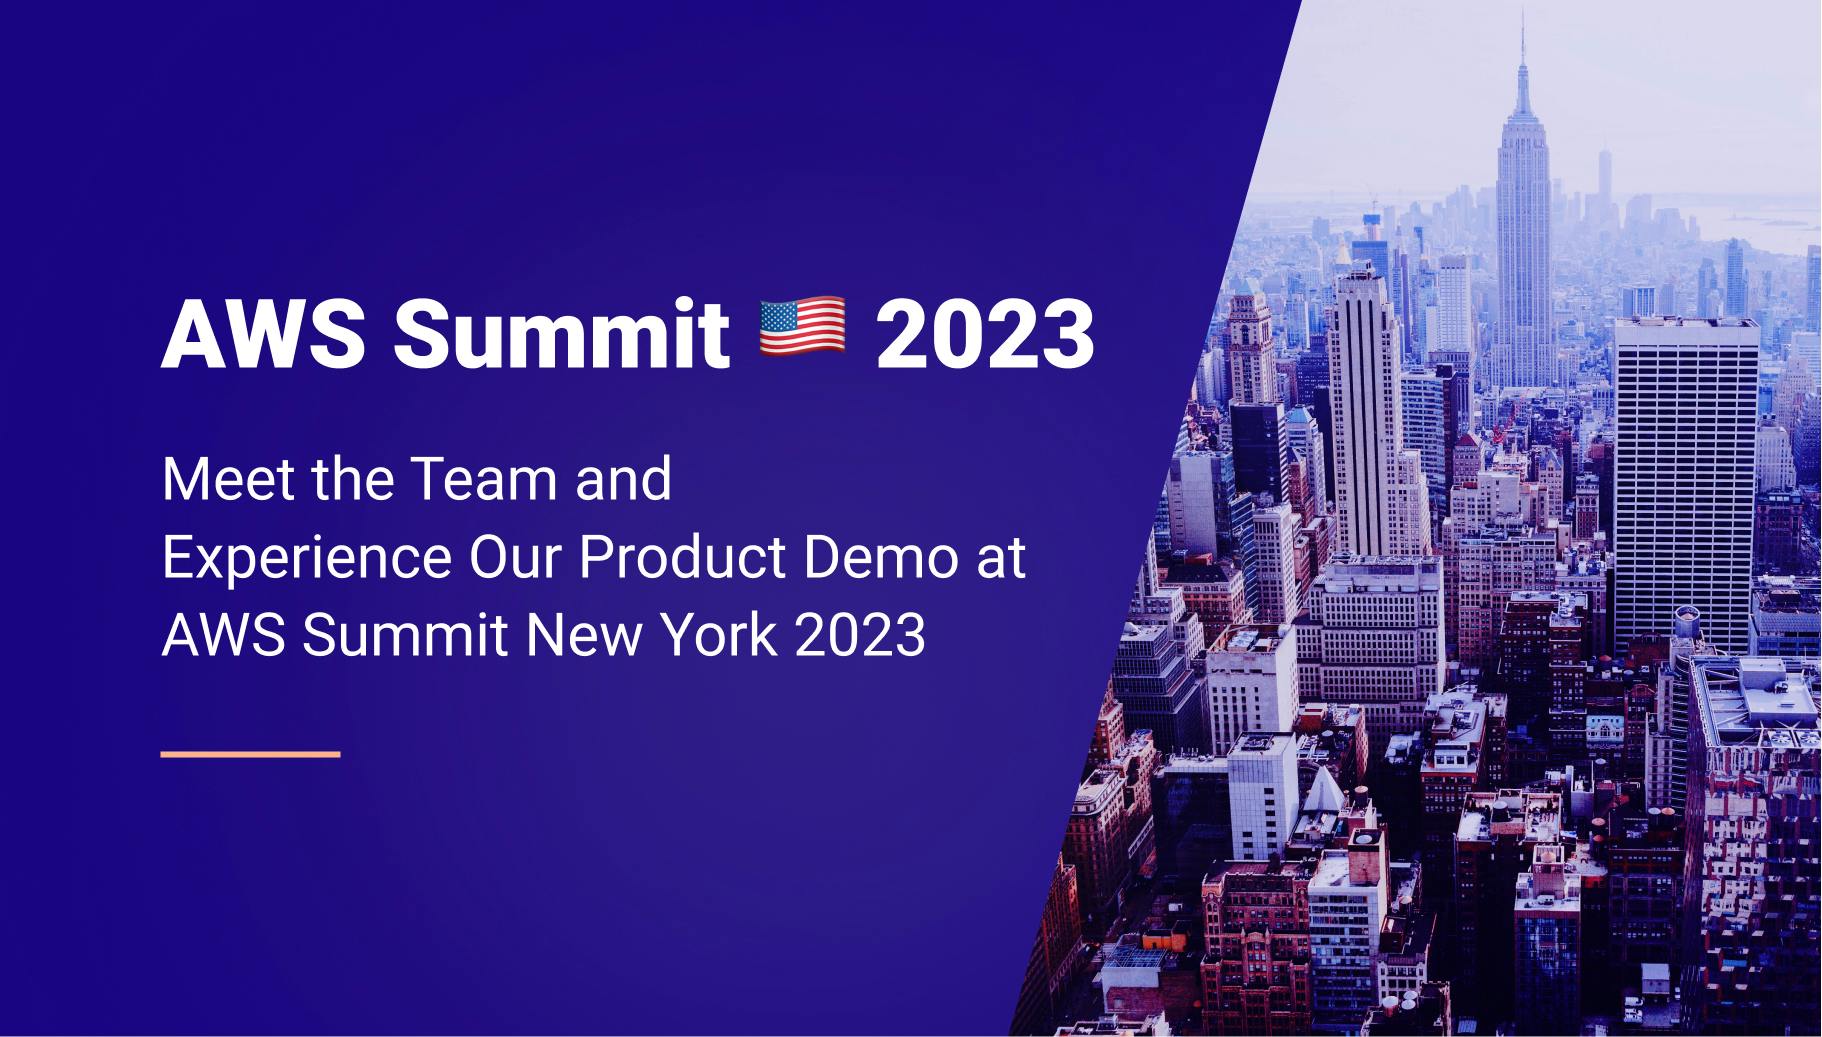 Join Qovery at AWS Summit New York 2023 - Meet the Team and Experience Our Product Demo! - Qovery